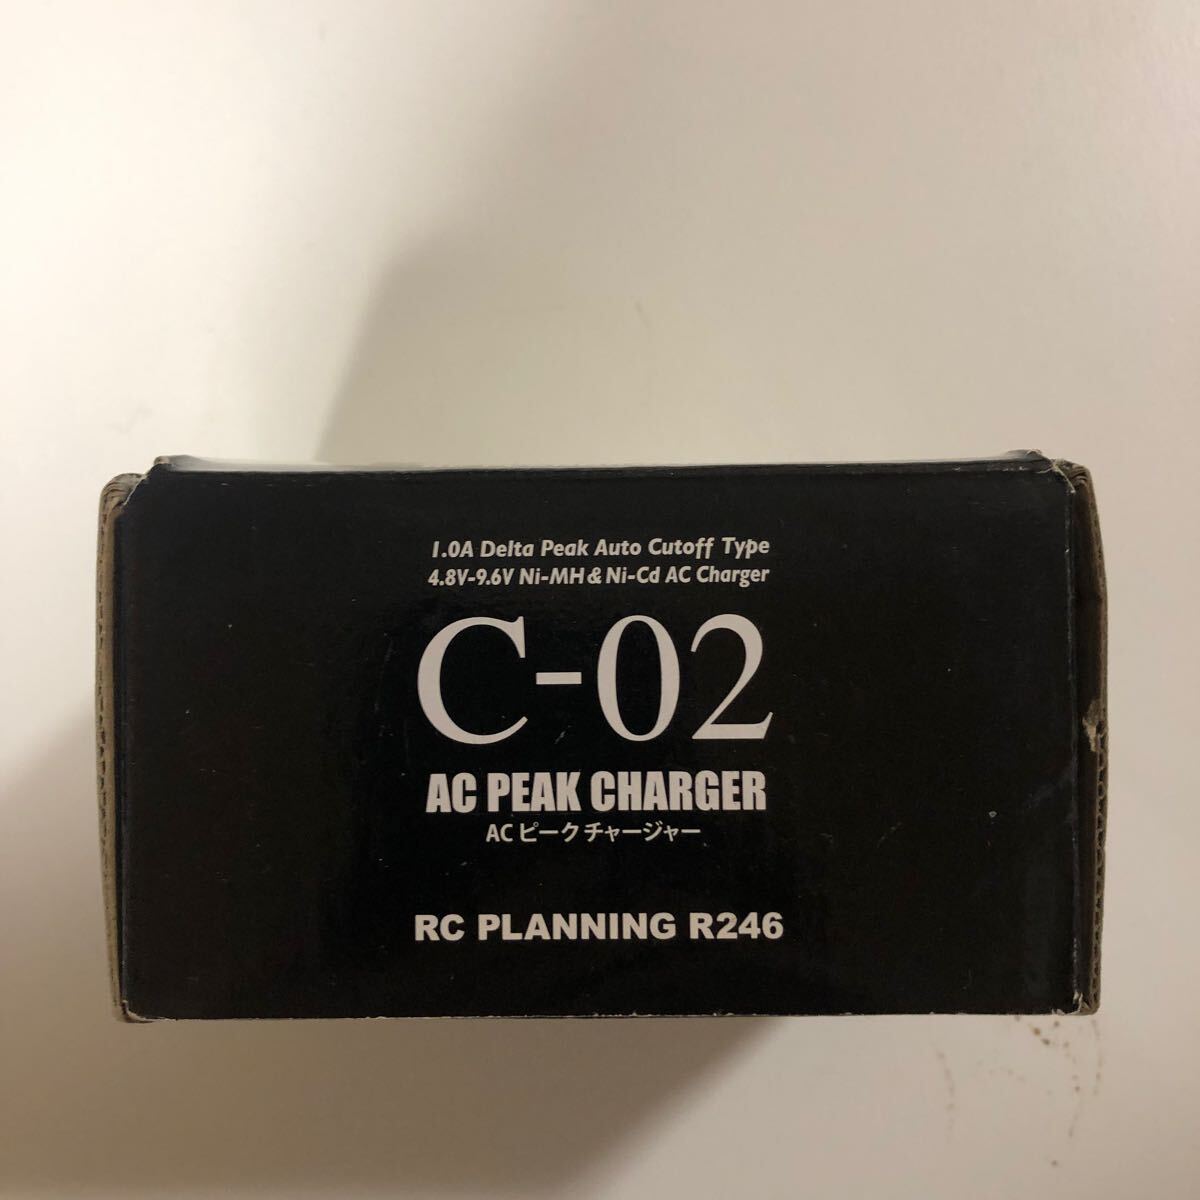 No. [ new goods * unopened | Kyosho | radio-controller ]C -02 ACpi-k charger 